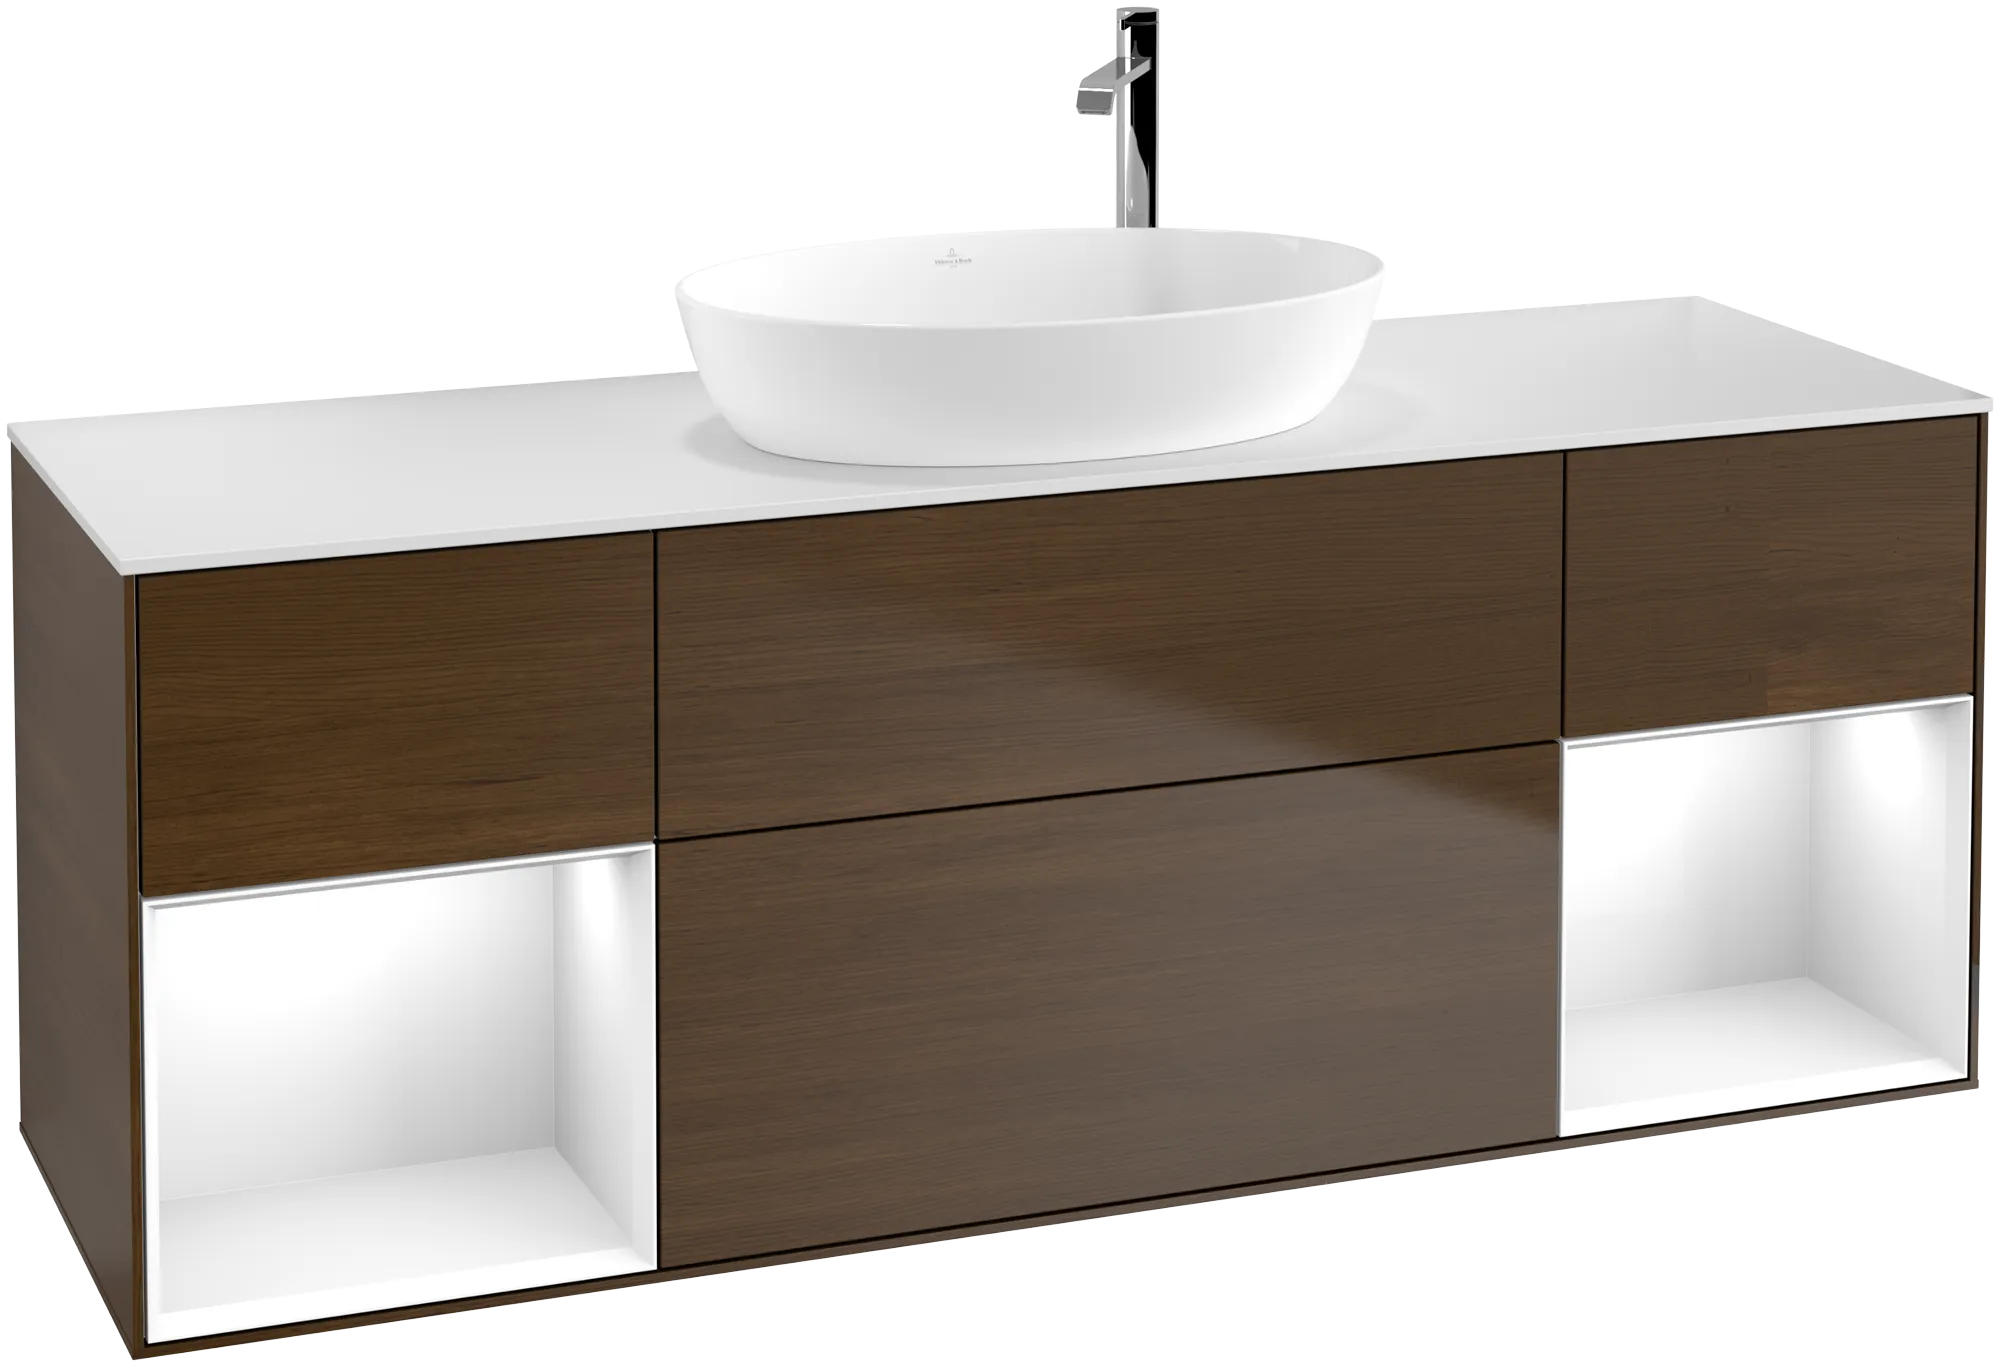 VILLEROY BOCH Finion Vanity unit, with lighting, 4 pull-out compartments, 1600 x 603 x 501 mm, Walnut Veneer / Glossy White Lacquer / Glass White Matt #G981GFGN resmi